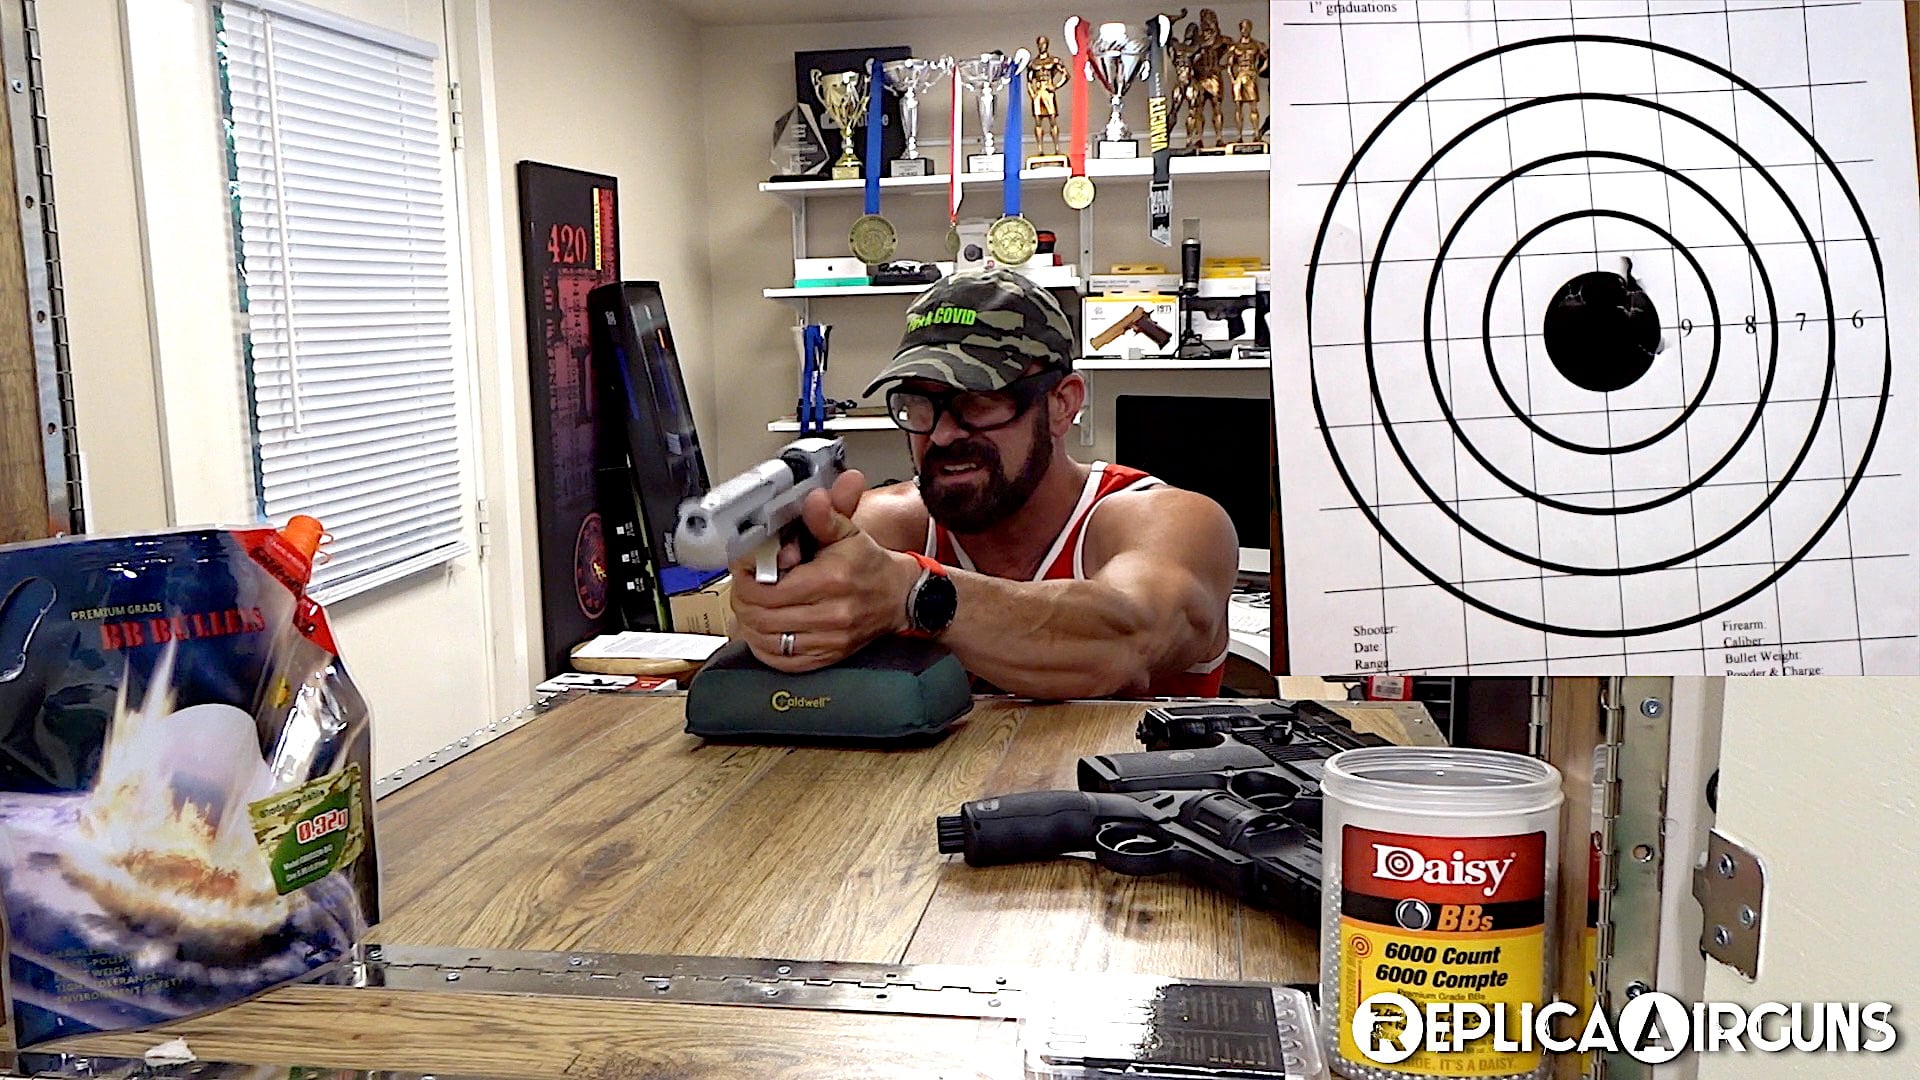 What has More Accuracy and Power - BB - Pellet - Airsoft - Paintball - Video 2 Accuracy